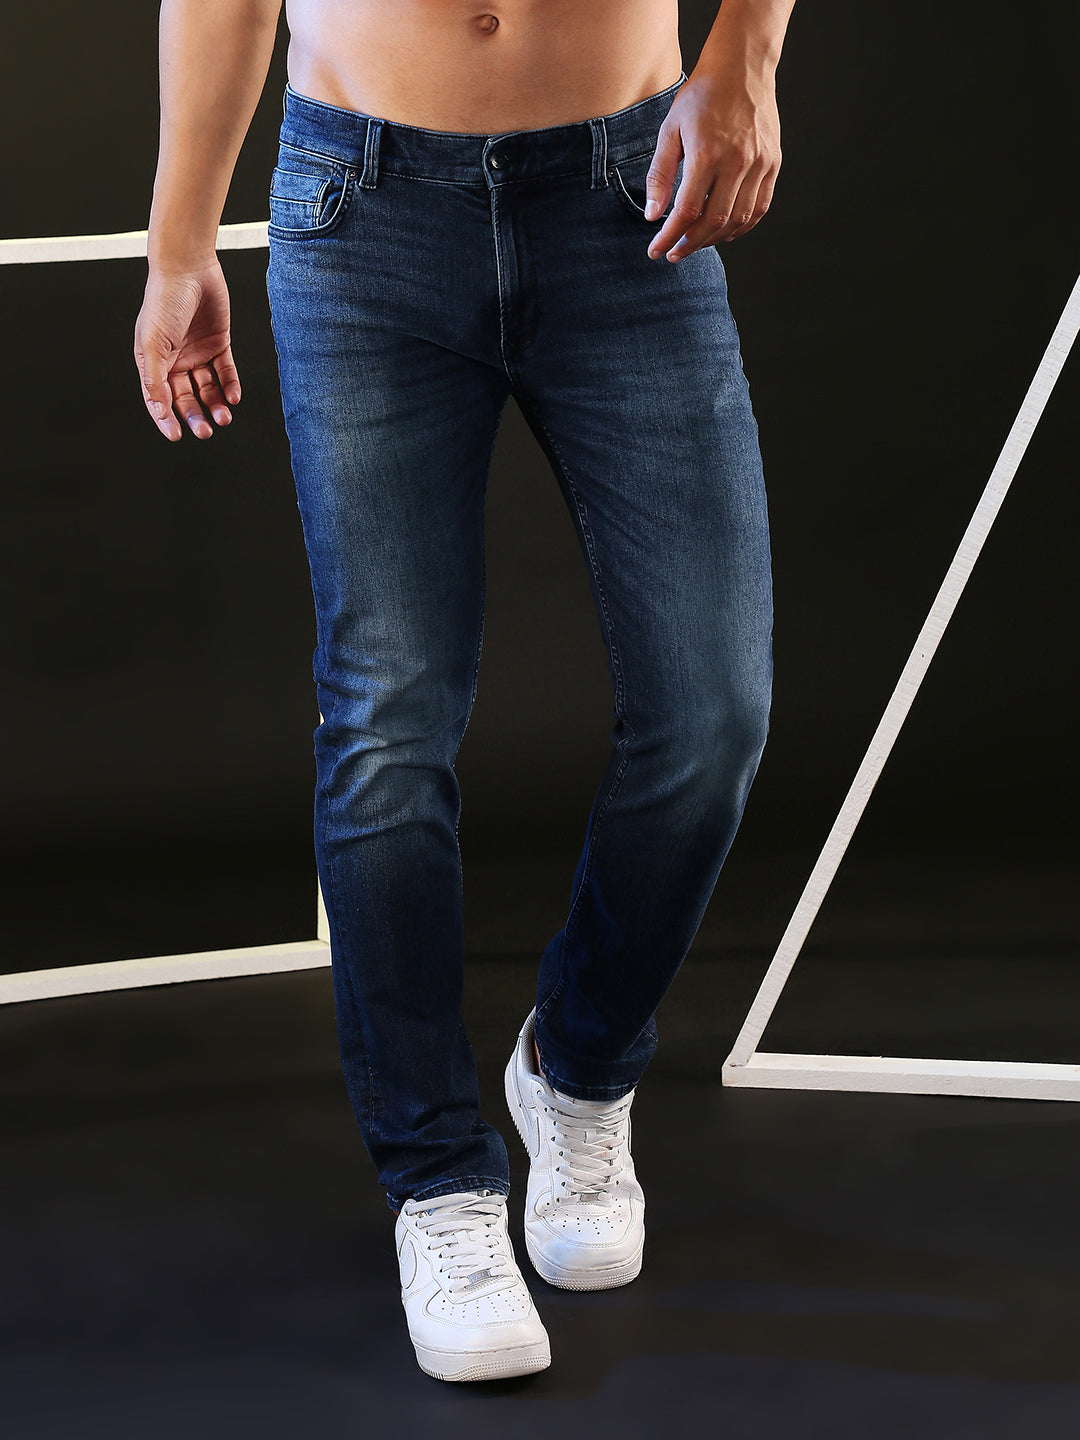 Spykar Limited Edition Dark Blue Regular Fit Narrow Length Mid rise Clean Look Premium Stretchable Denim Jeans For Men (Rover)